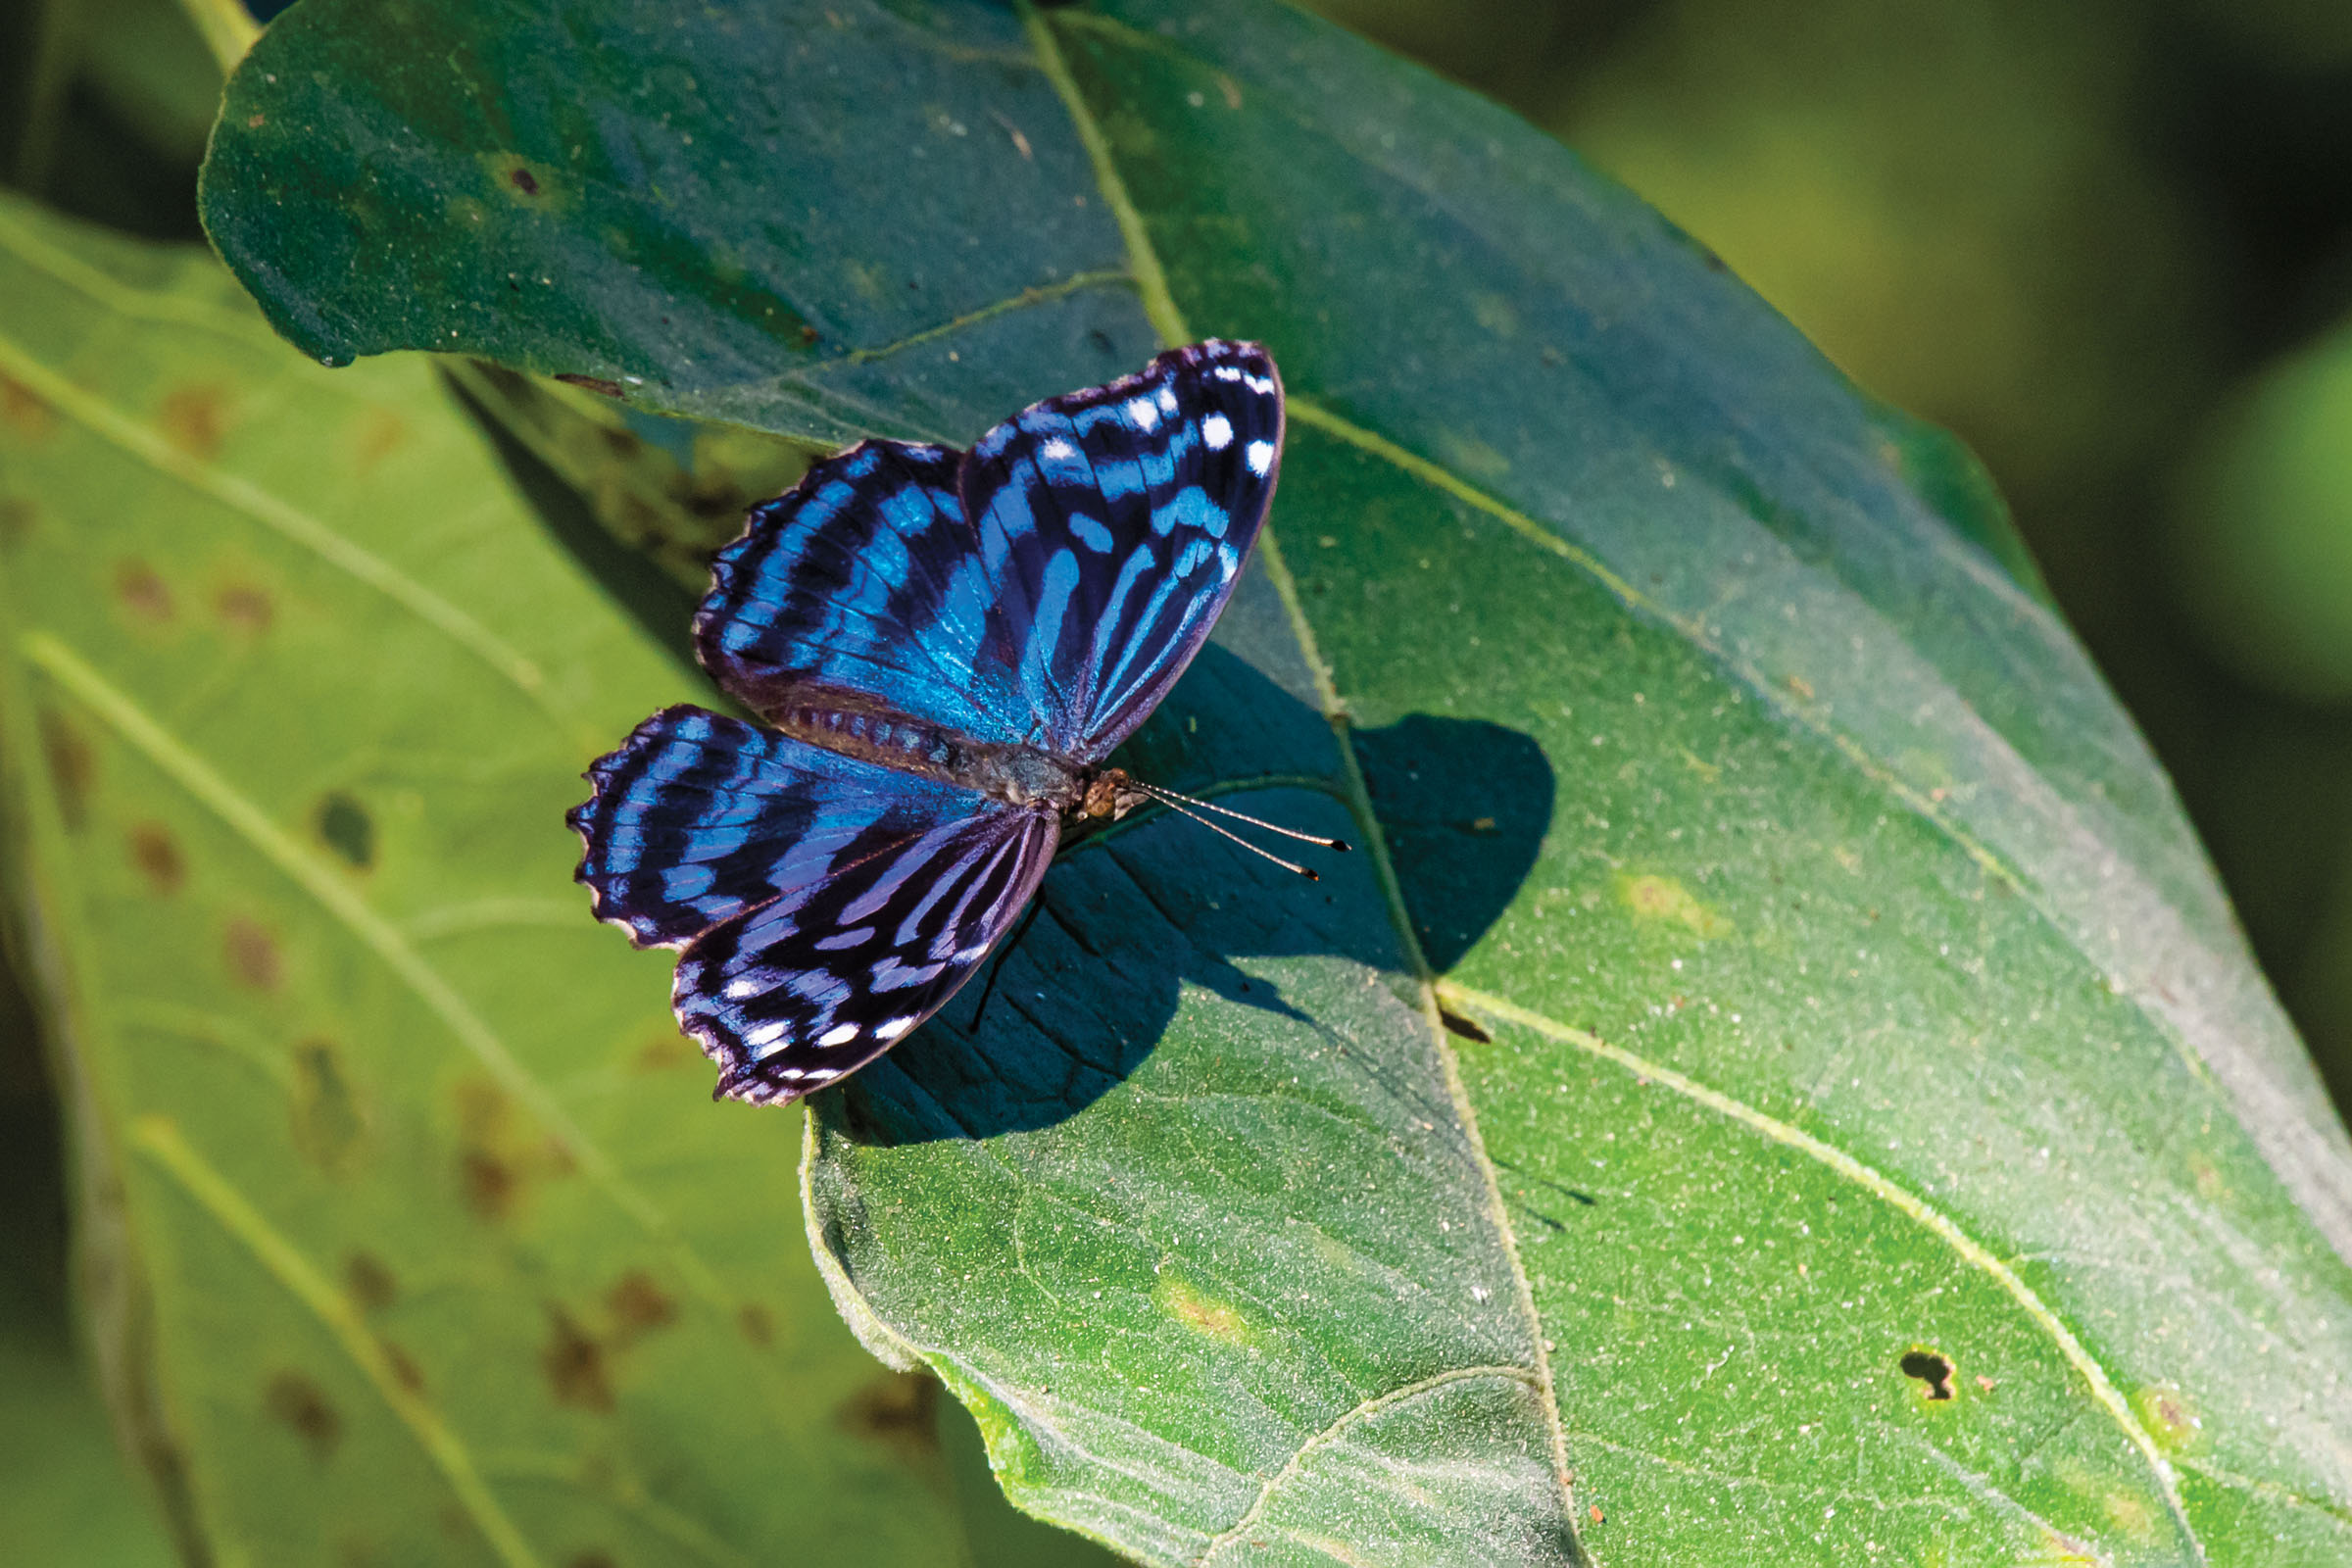 Bright blue wings with black spots on a butterfly resting on a green leaf